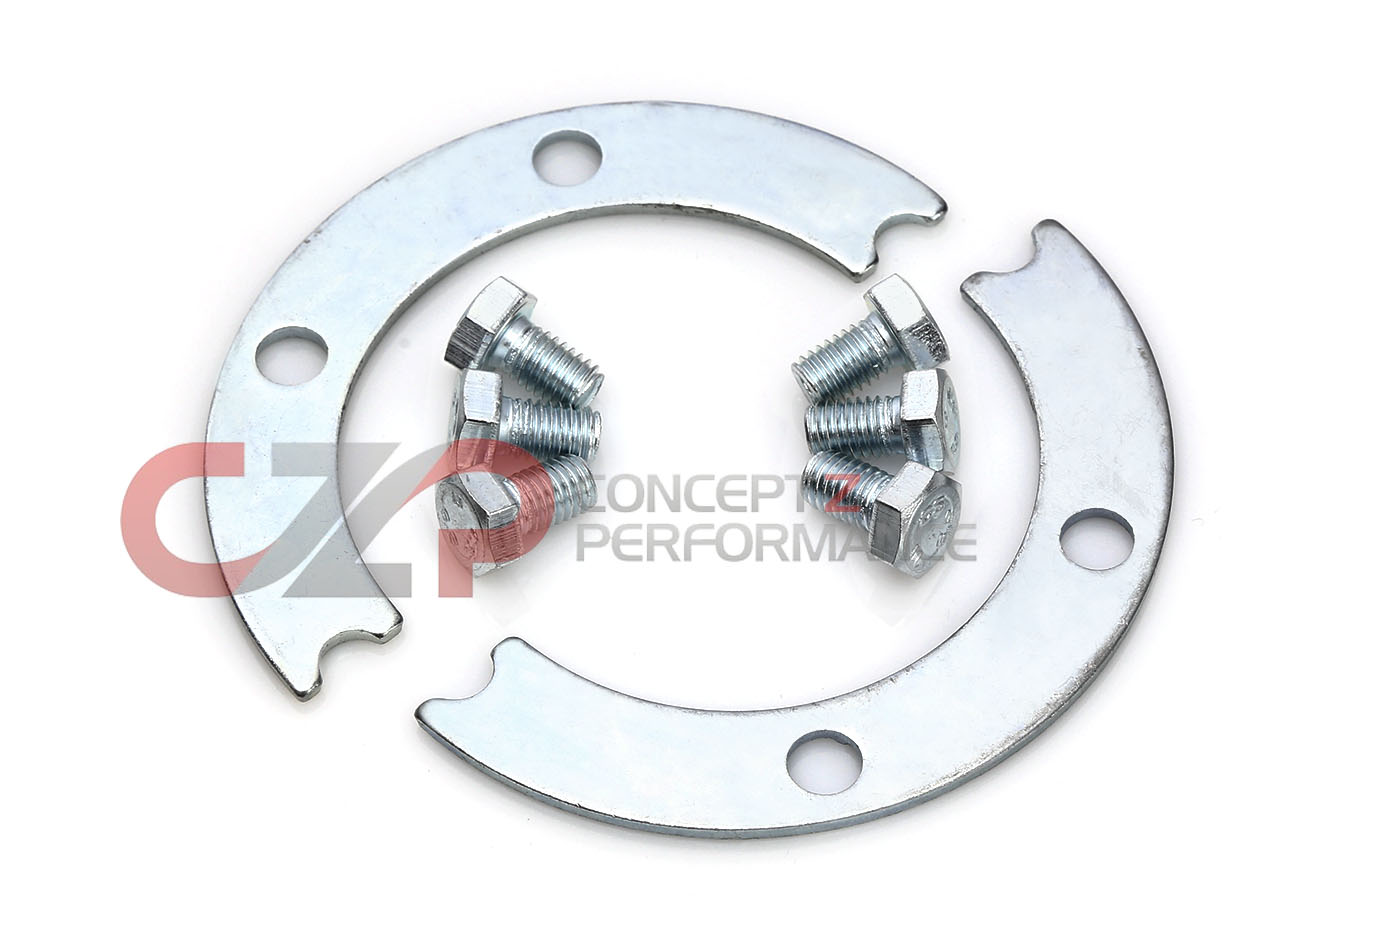 CZP Turbine Housing Mounting Hardware Kit, Washer Plates and Bolt Set - GT25R thru GT35R